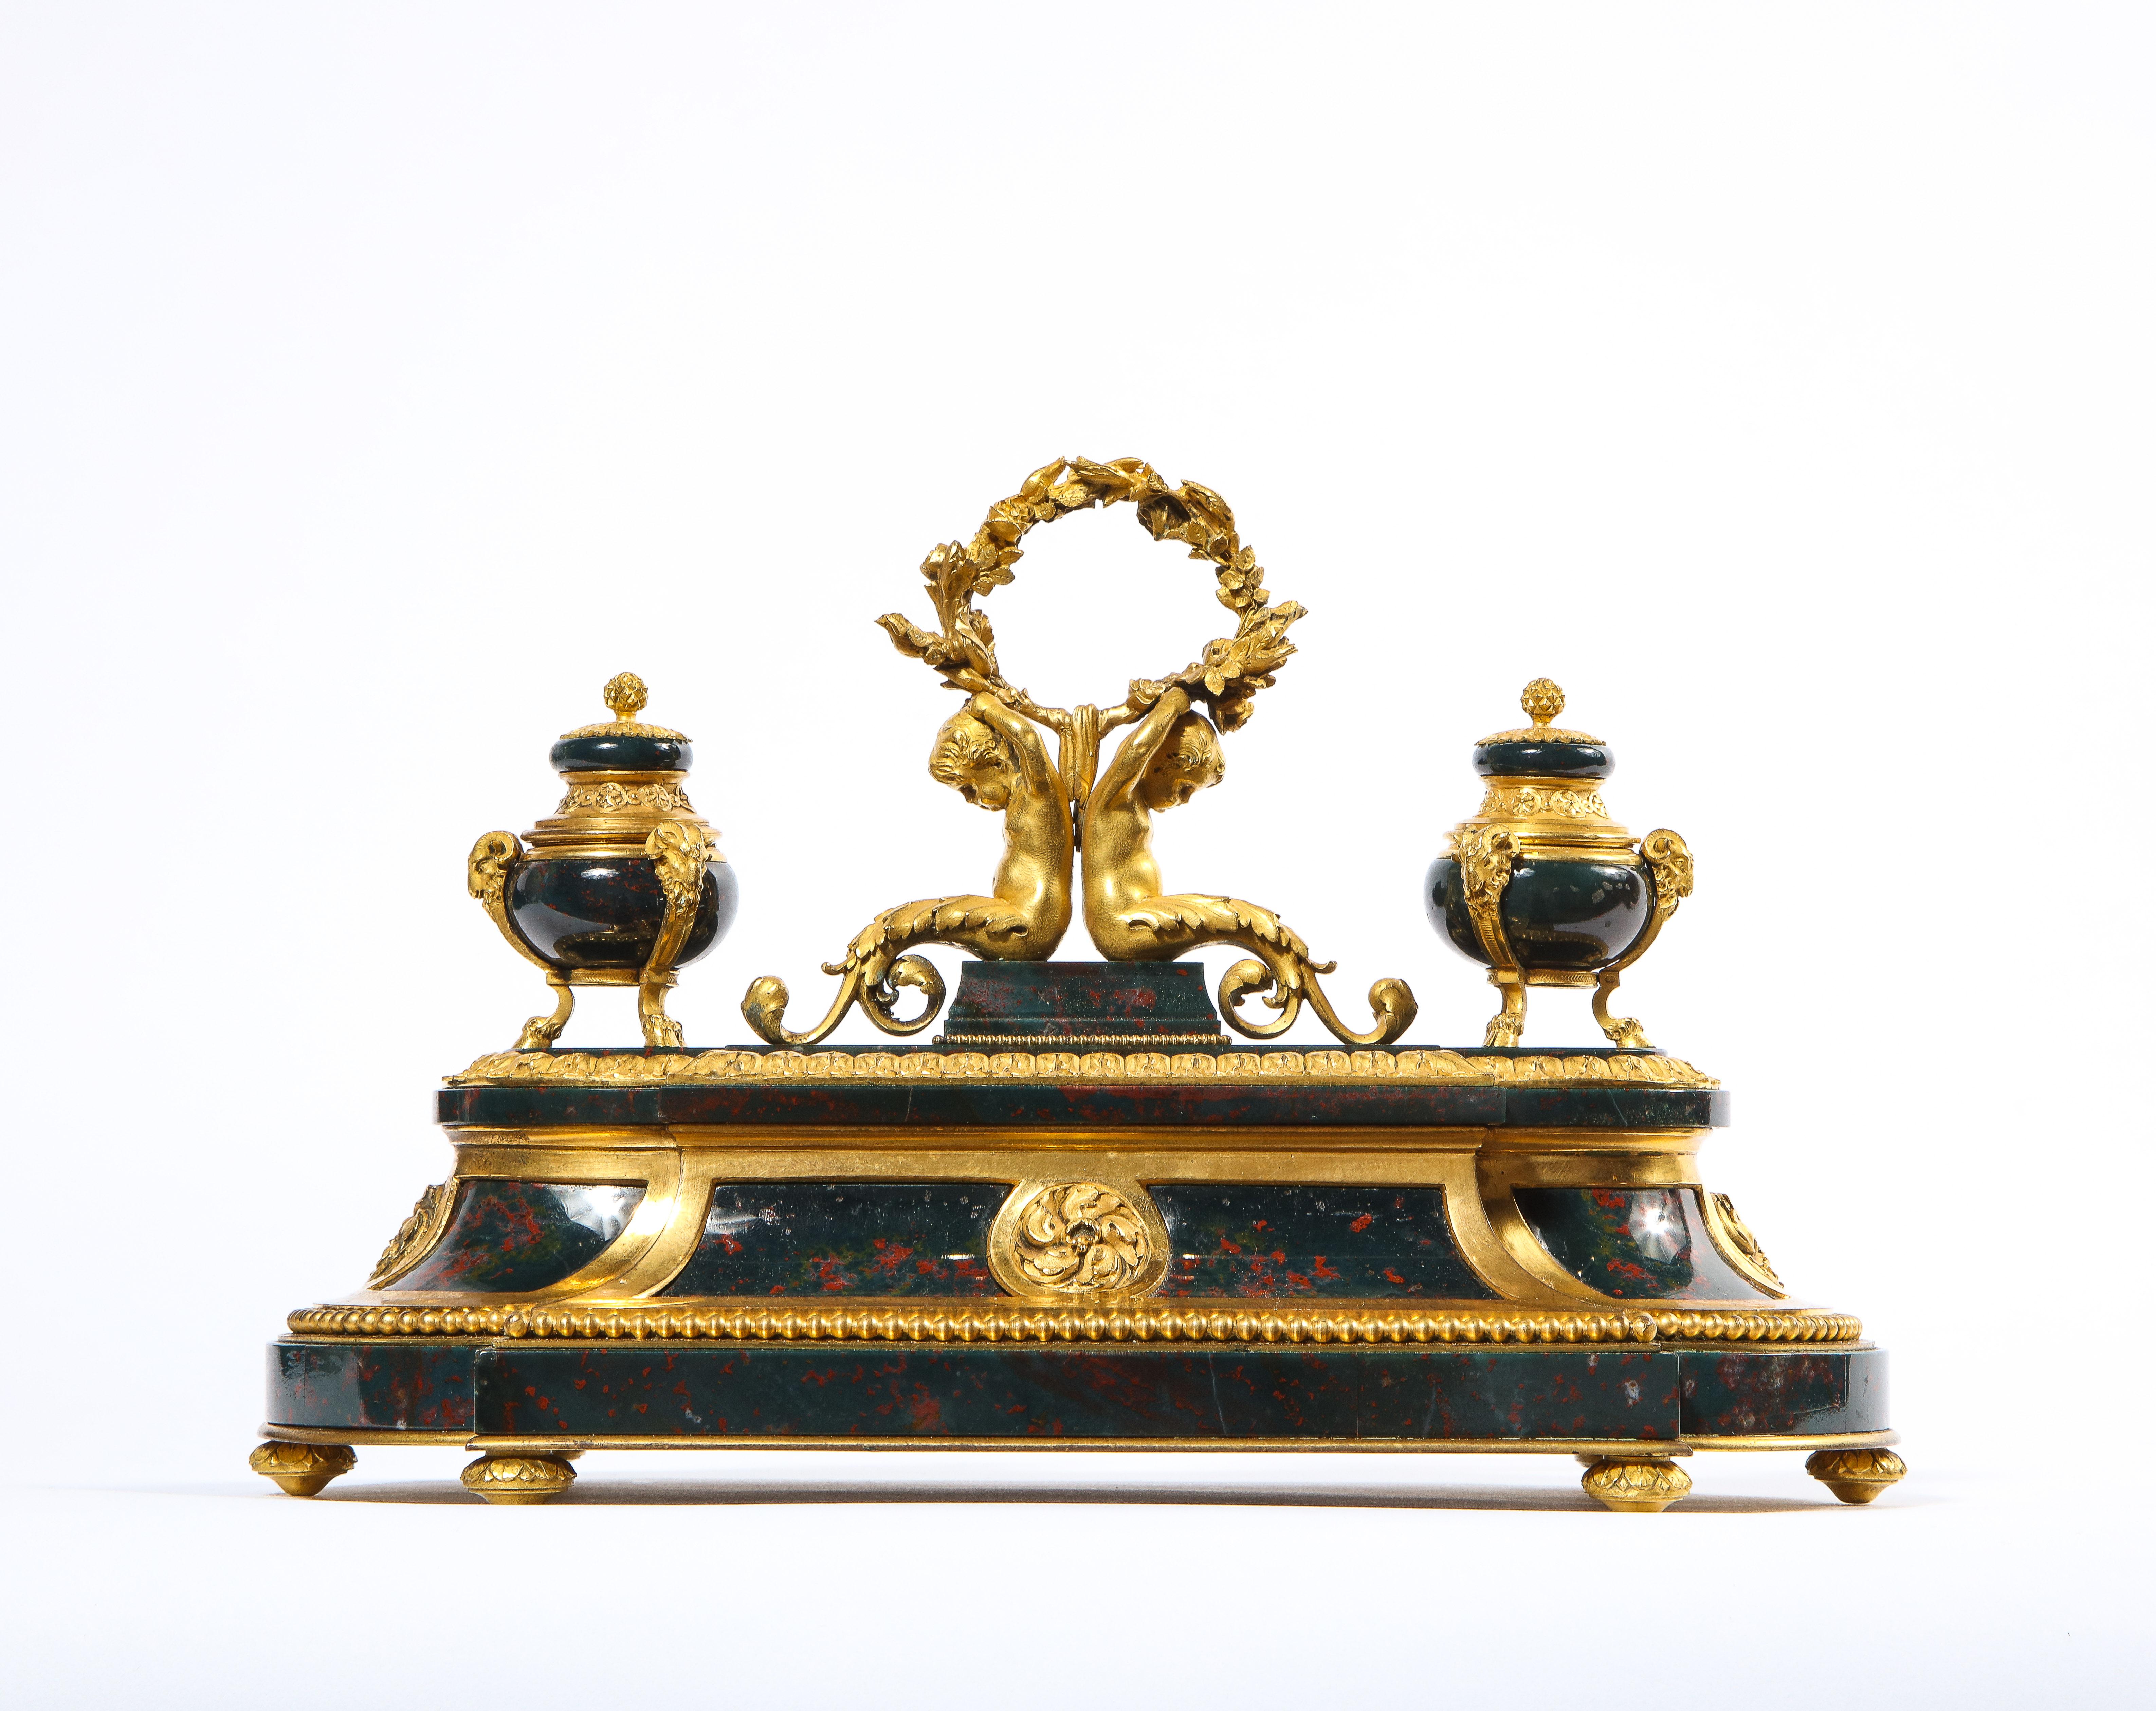 An Exquisite and Rare French Louis XVI Style Ormolu-Mounted Bloodstone Inkwell For Sale 9